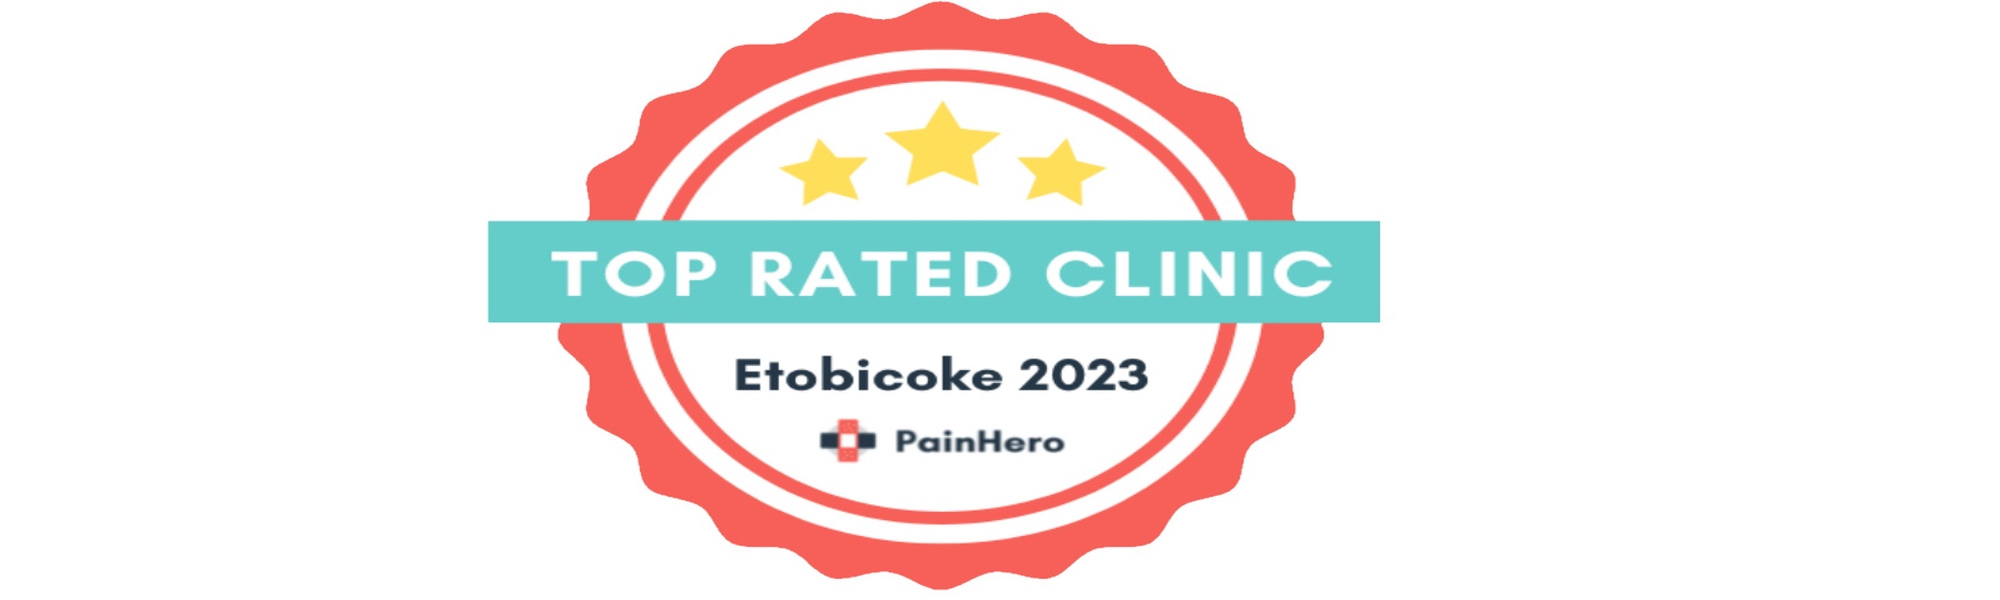 Best Rated Clinic 2023